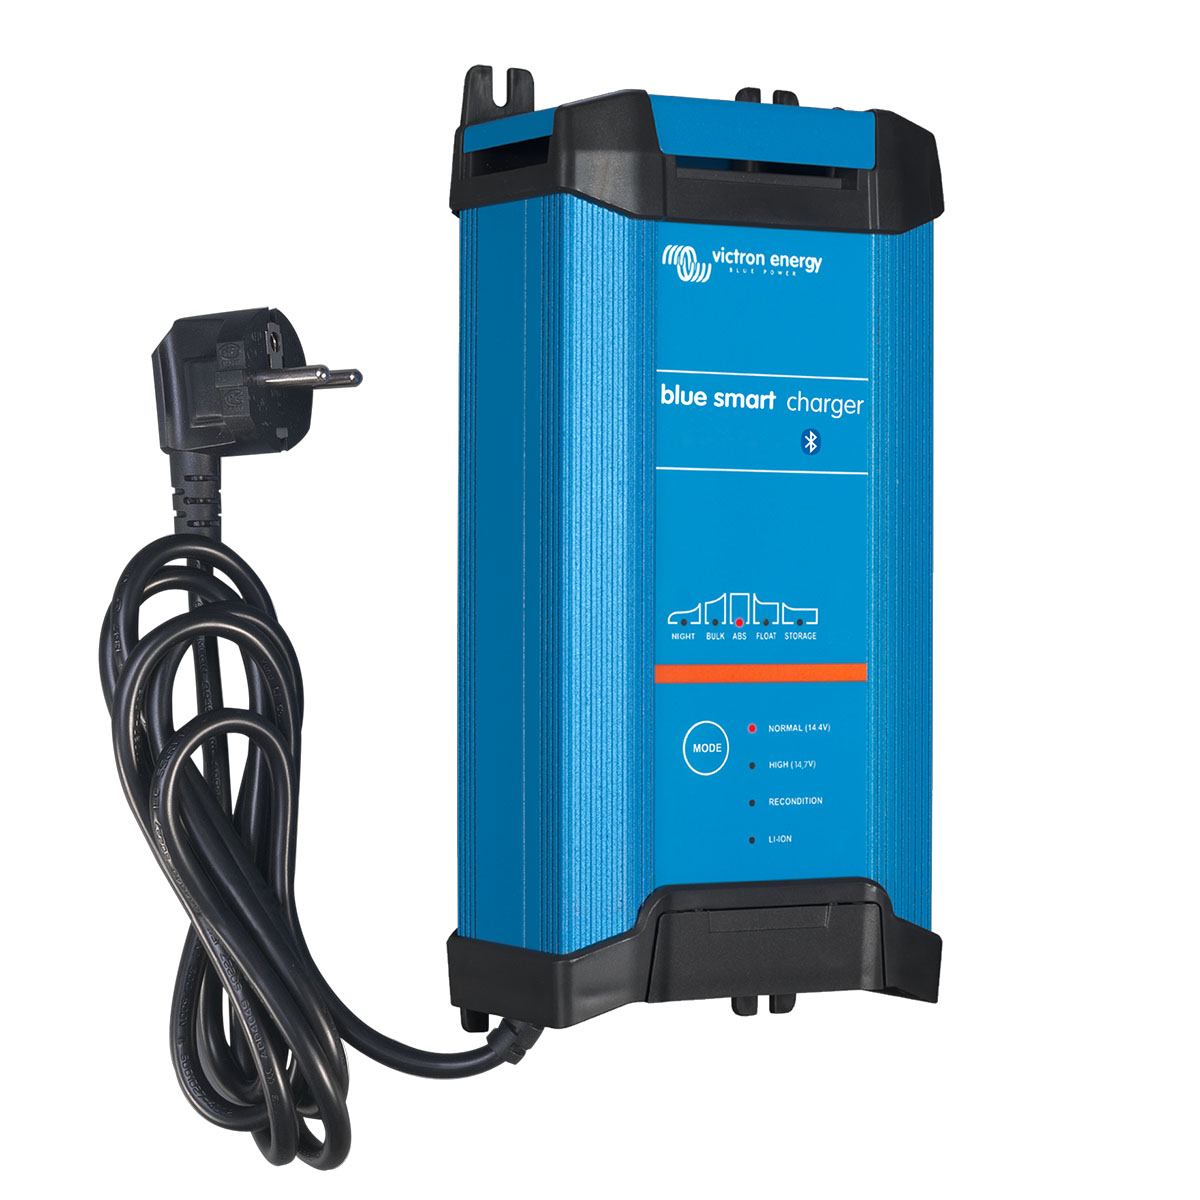 Victron Blue Smart IP22 Charger 12/15(1) 230V CEE 7/7 (USt-befreit nach §12 Abs.3 Nr. 1 S.1 UStG)